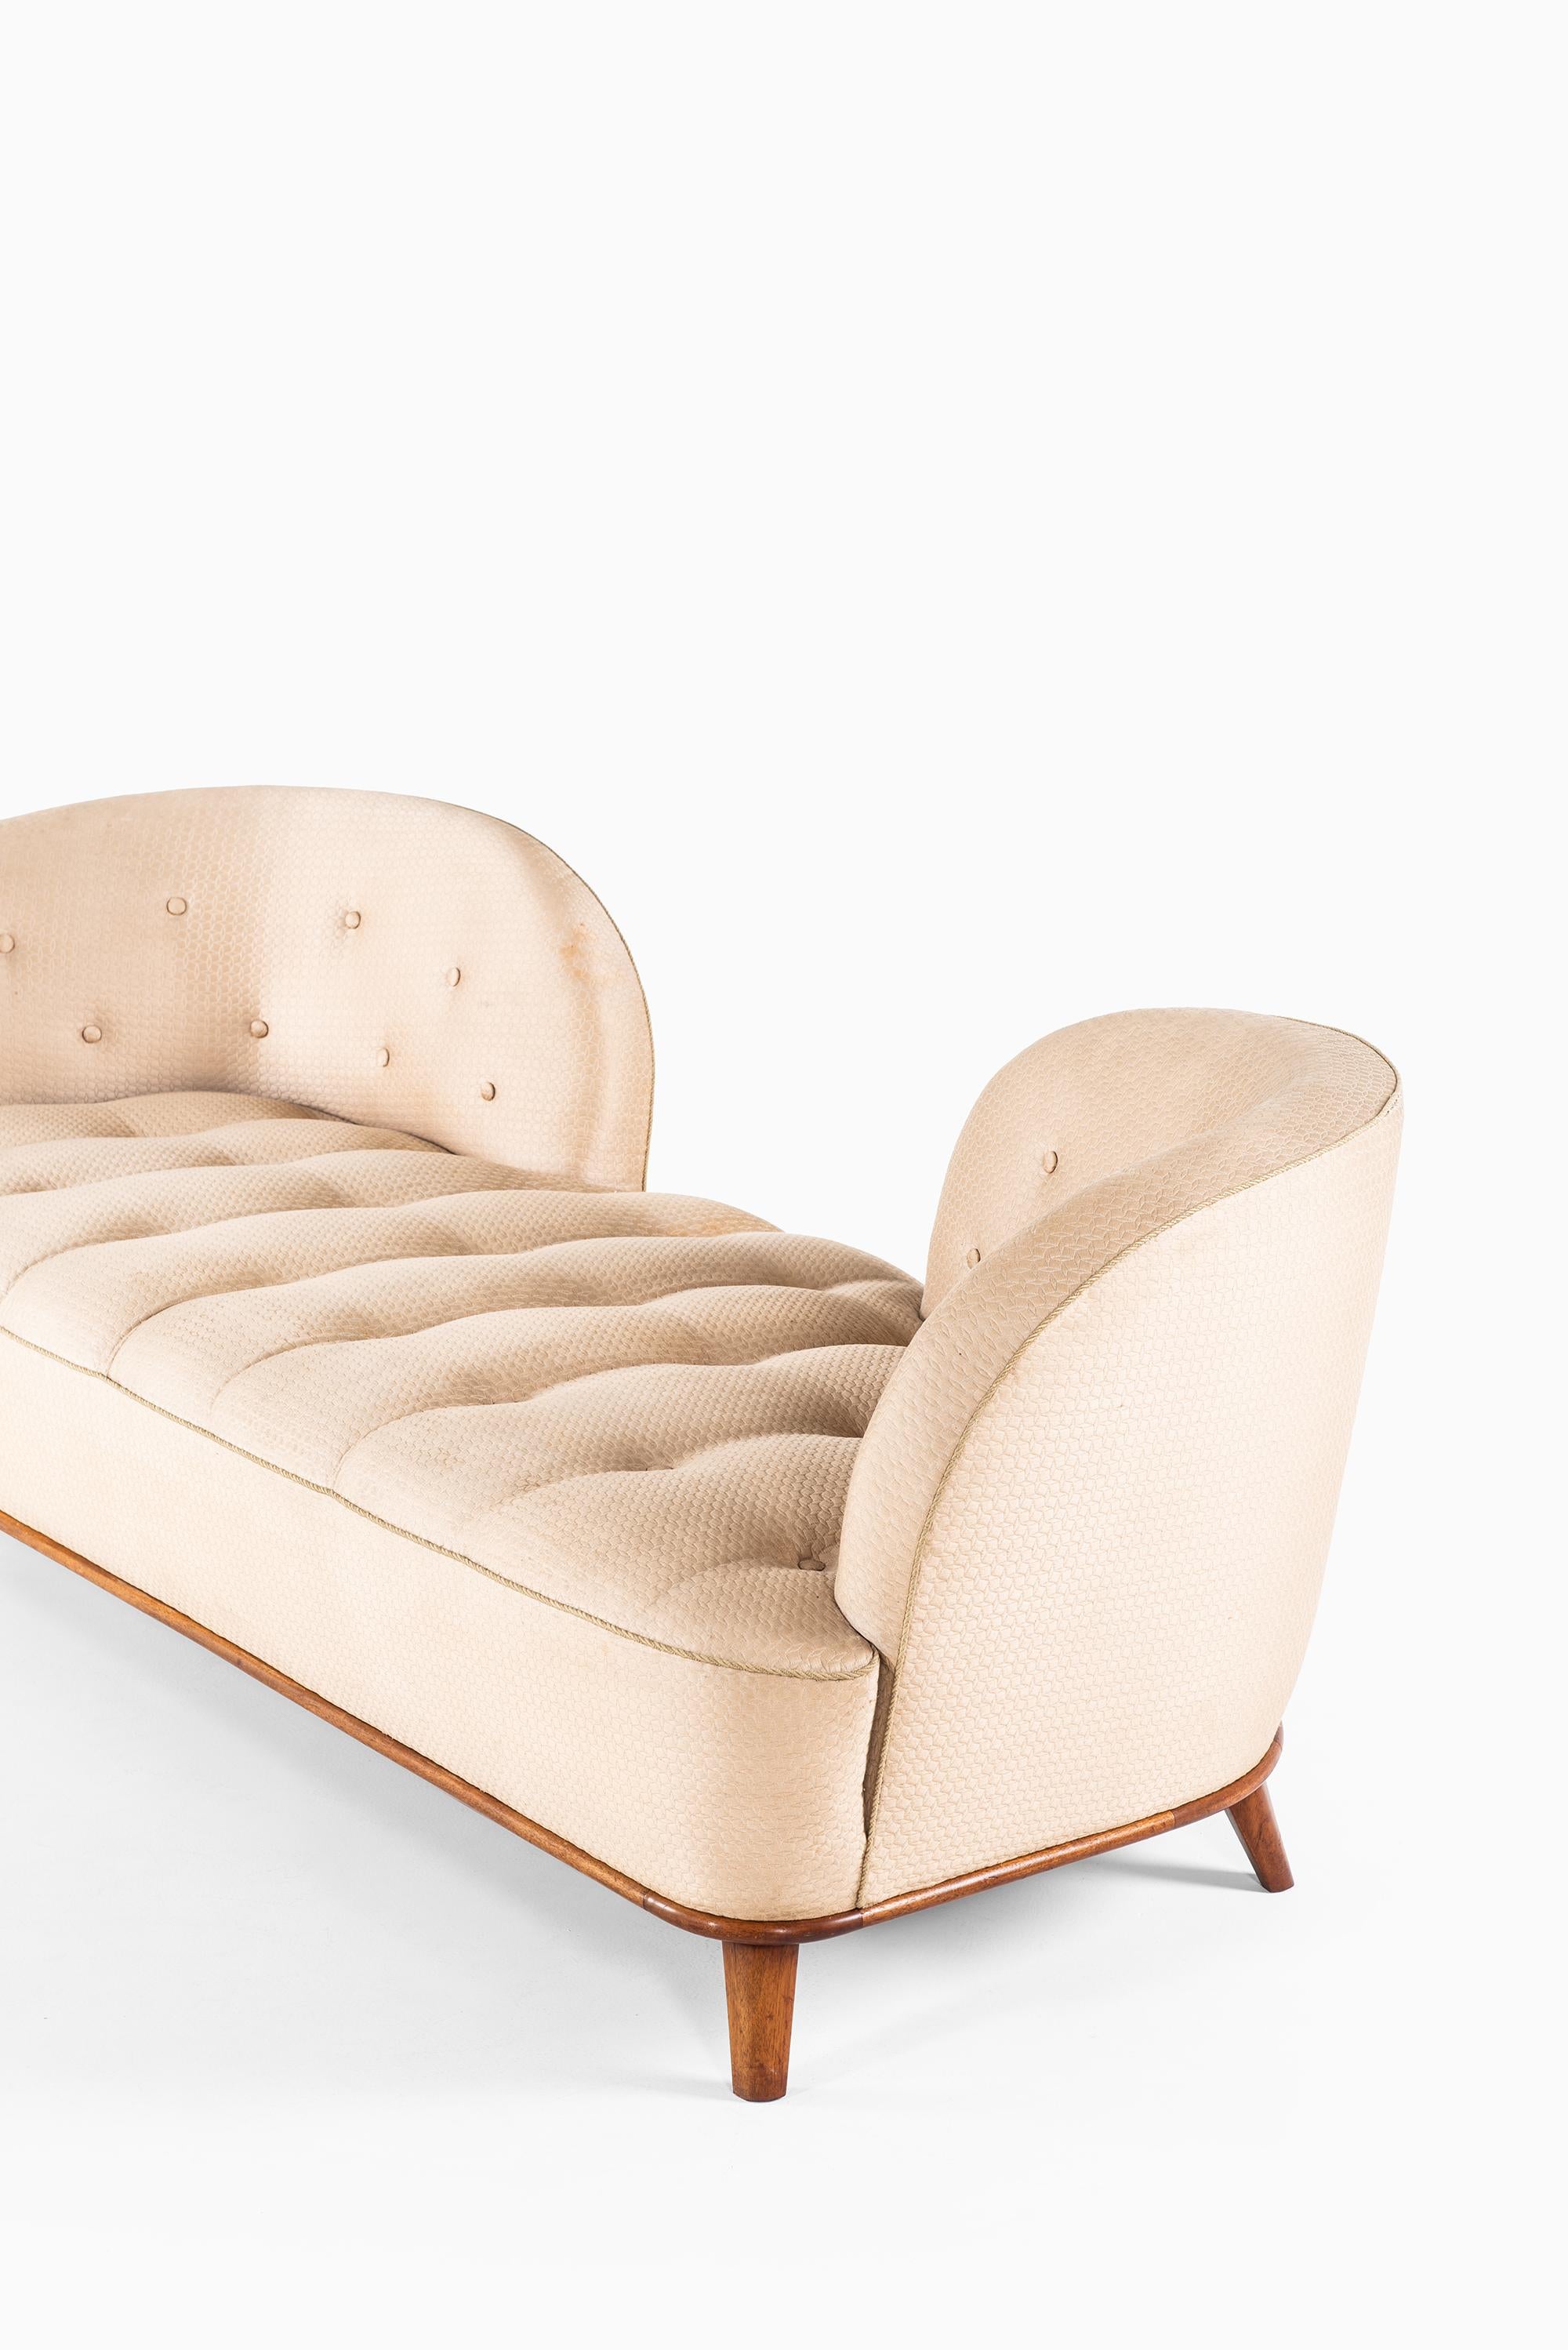 Mid-20th Century Sofa / Daybed Attributed to Tor Wolfenstein